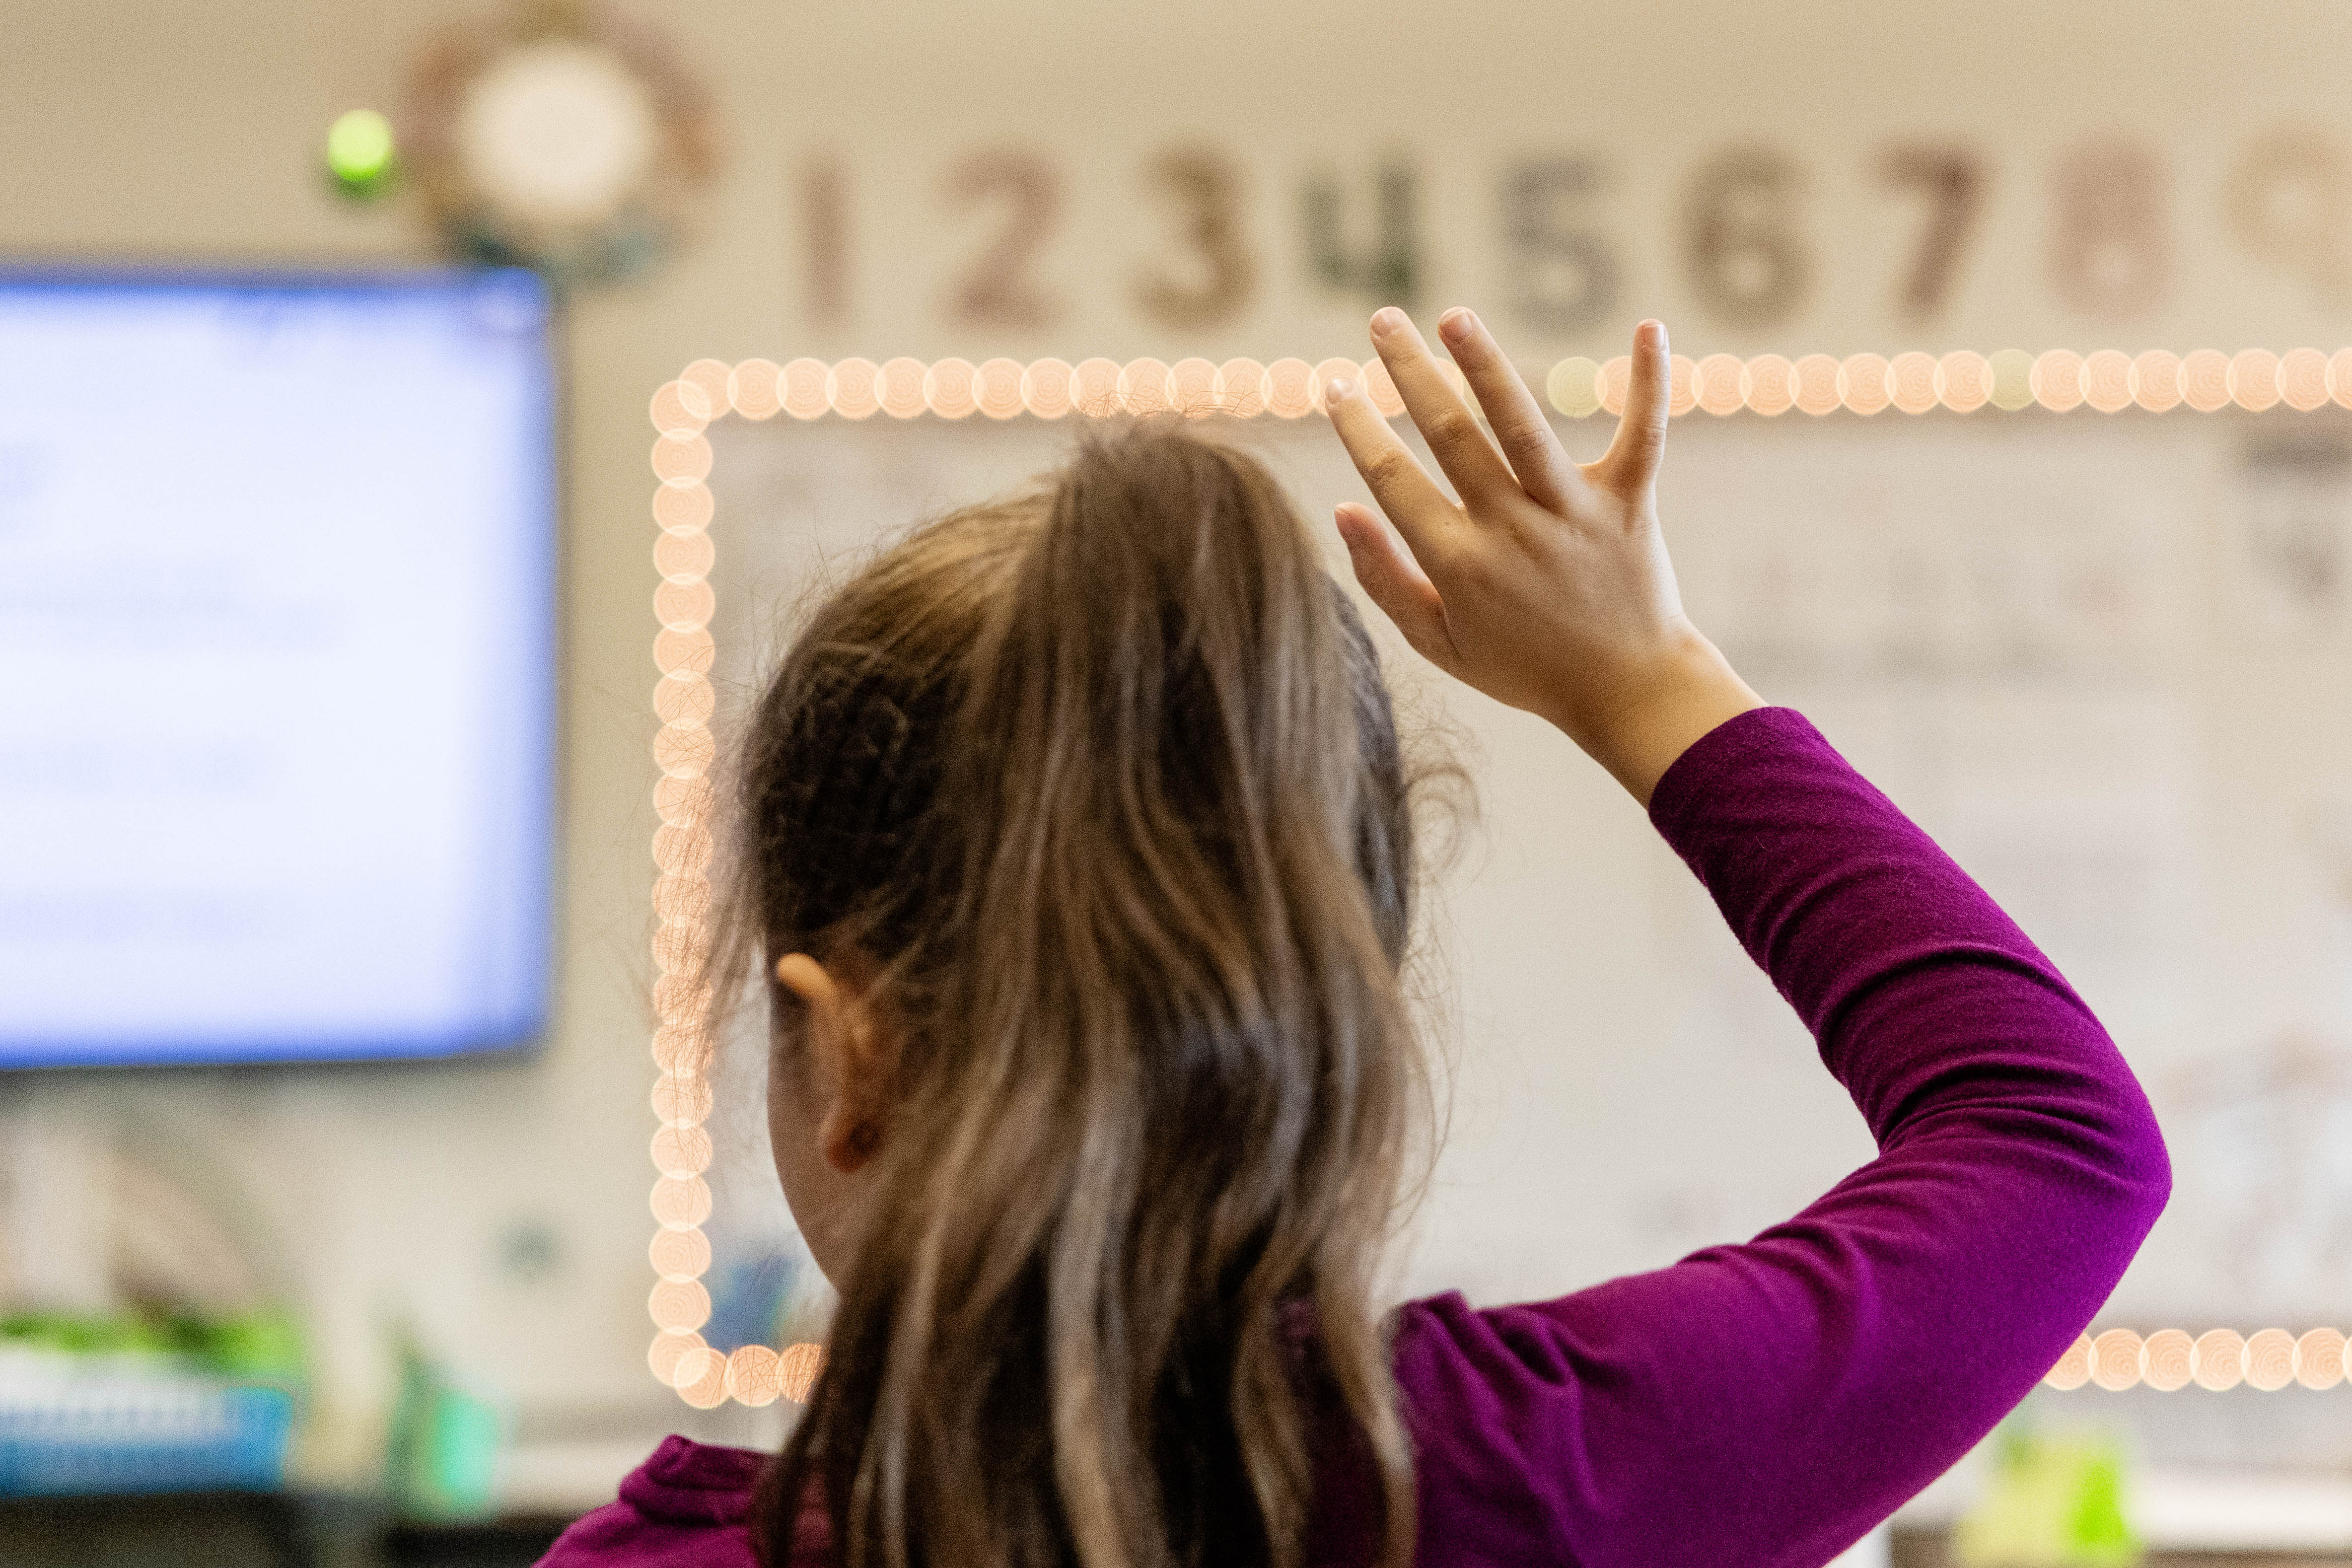 An elementary school student raises their hand in a classroom.